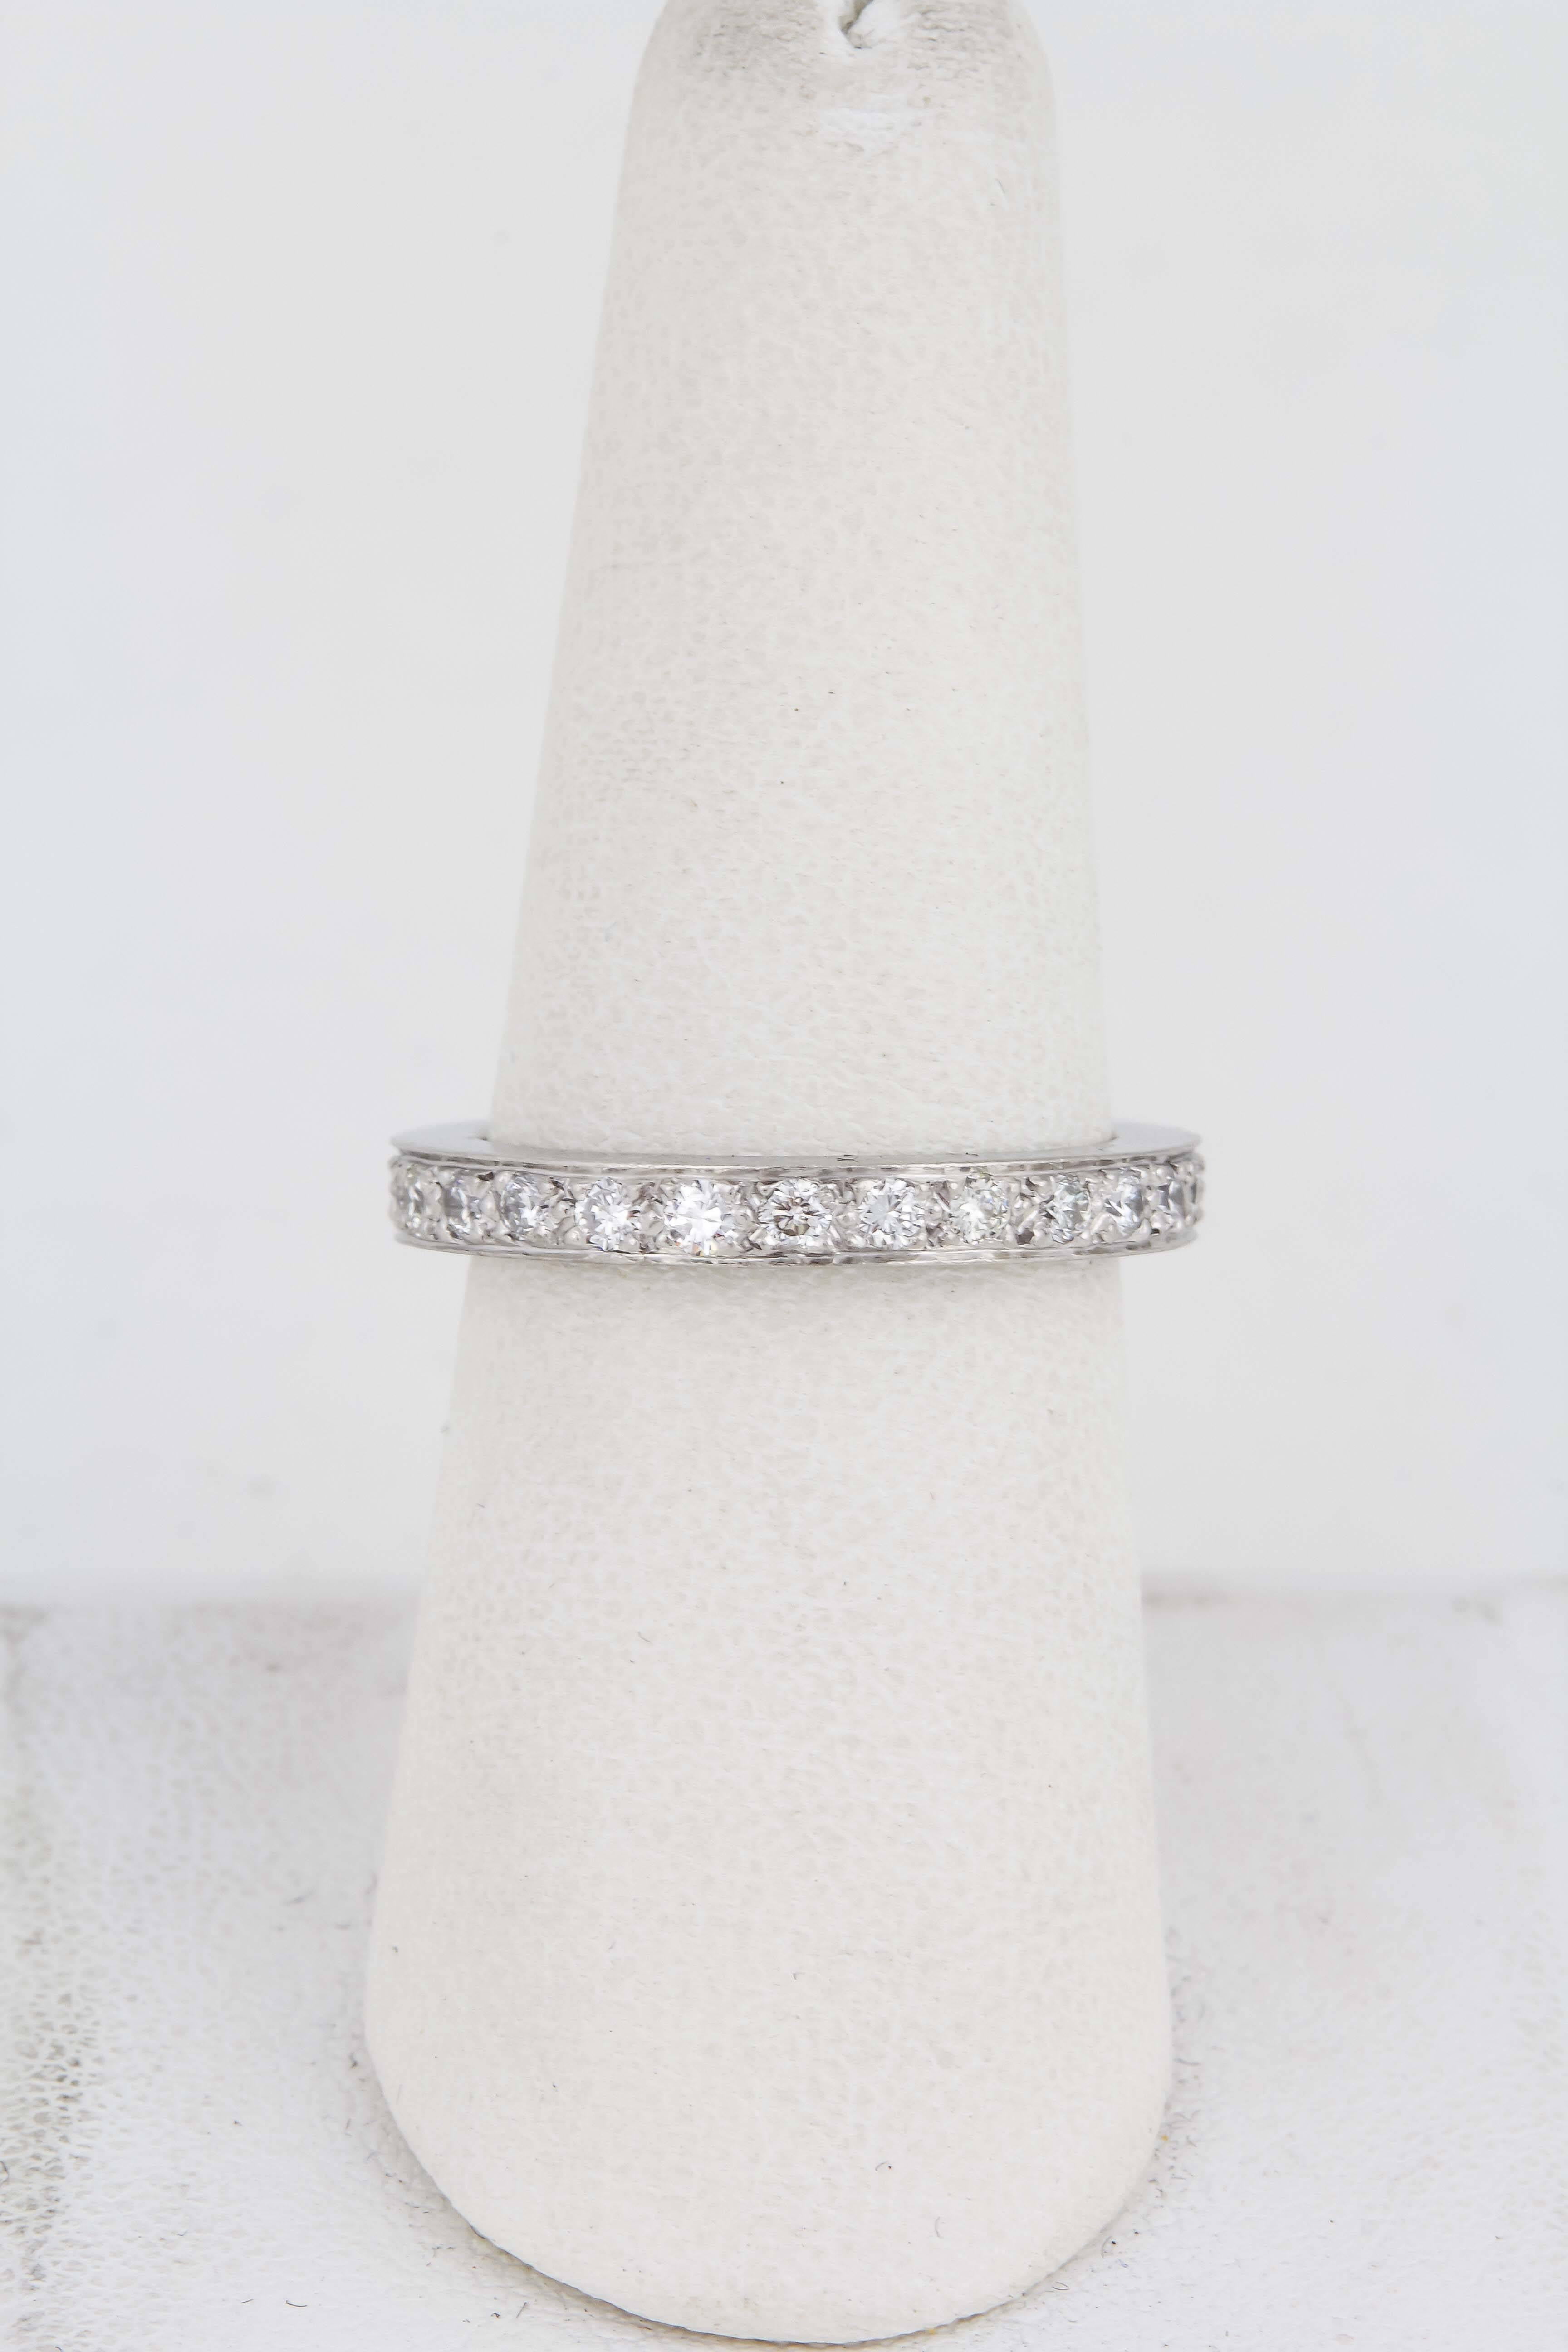 One Platinum Eternity Band Embellished With Approximately 1.10 cts of Old European Cut Diamonds. Ring Size 7.5 Designed In America In The 1930's.